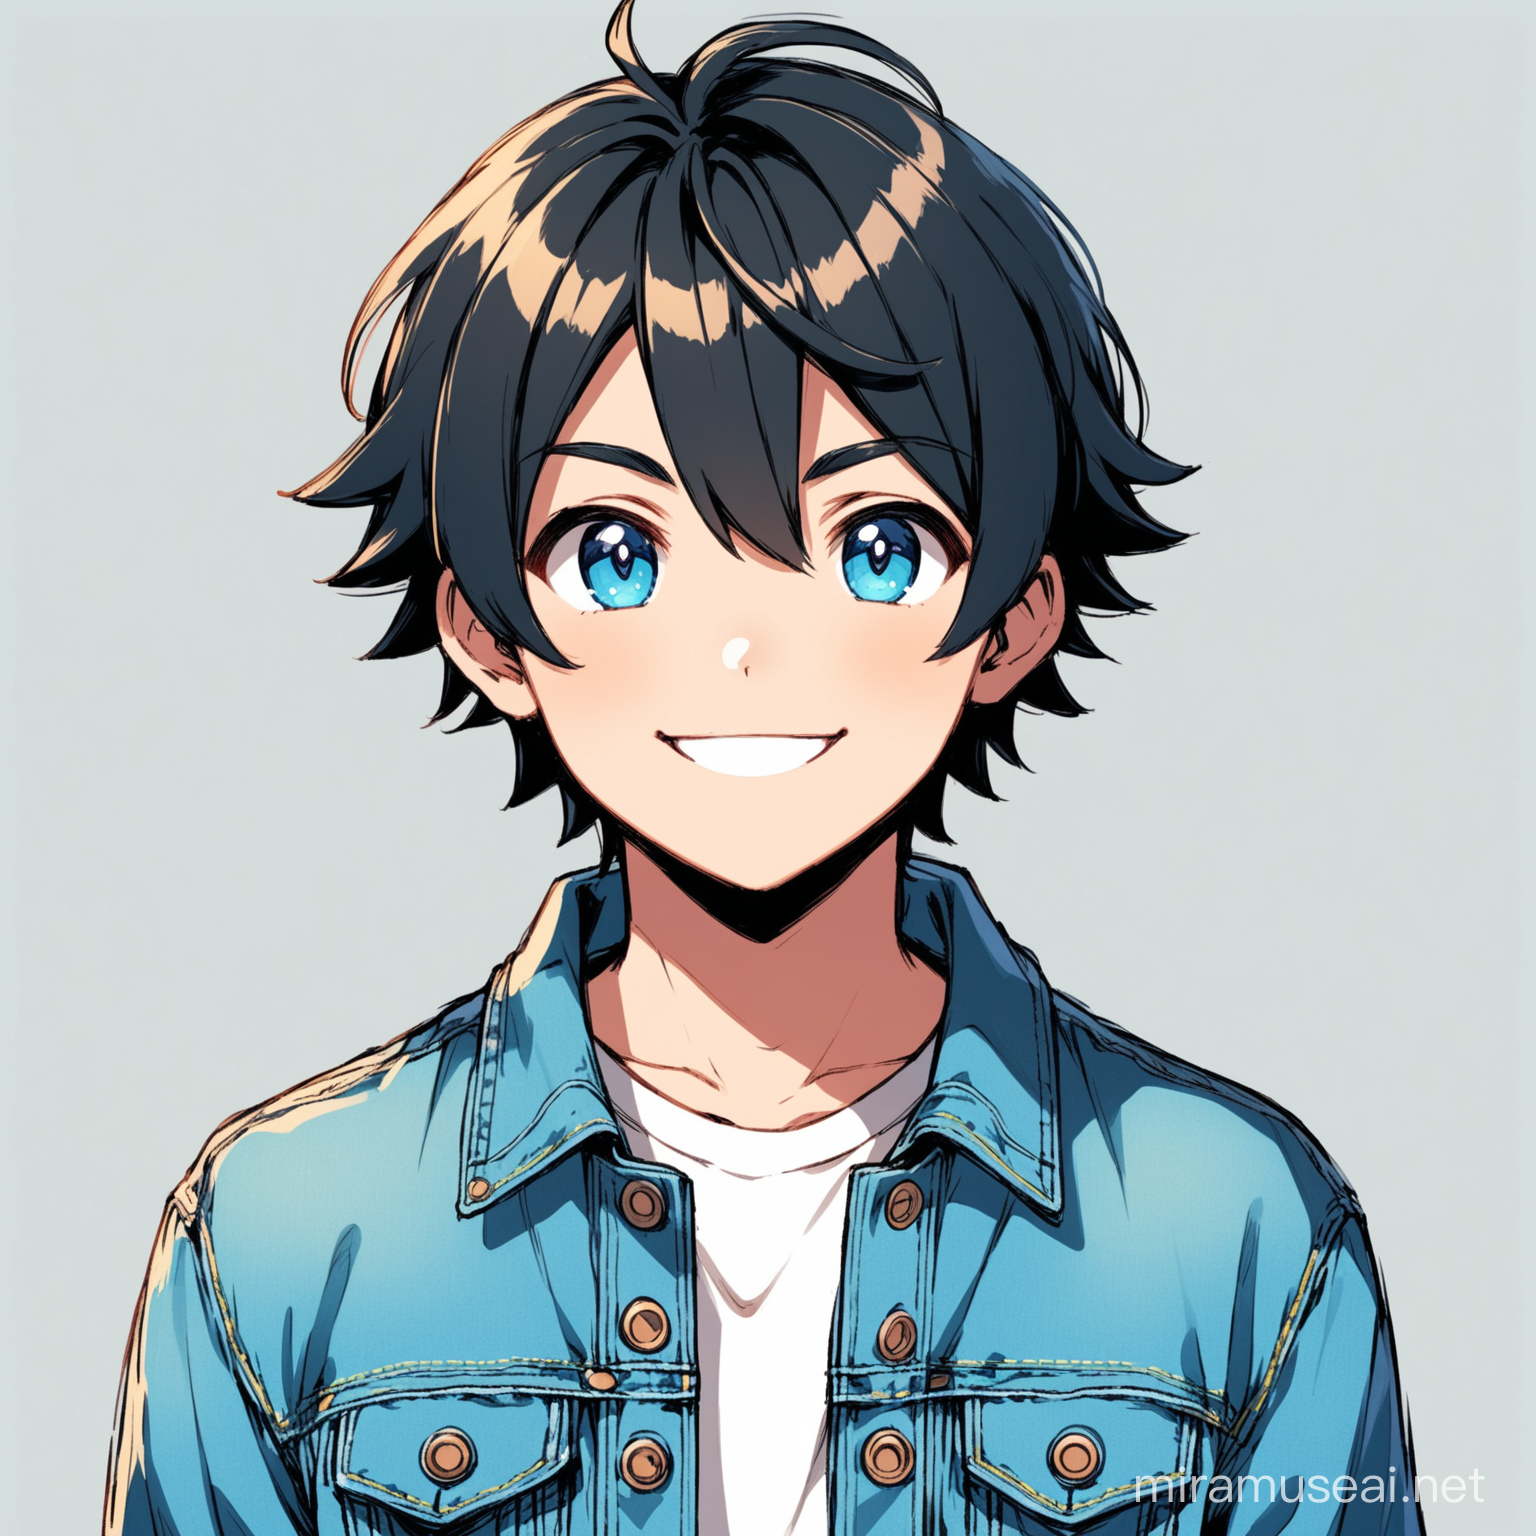 Pokemon-style young man, with blue eyes, black hair, short hair, a denim jacket,  happy, friendly smile, looking at the camera facing forward, front view 2d, straight-on, cute